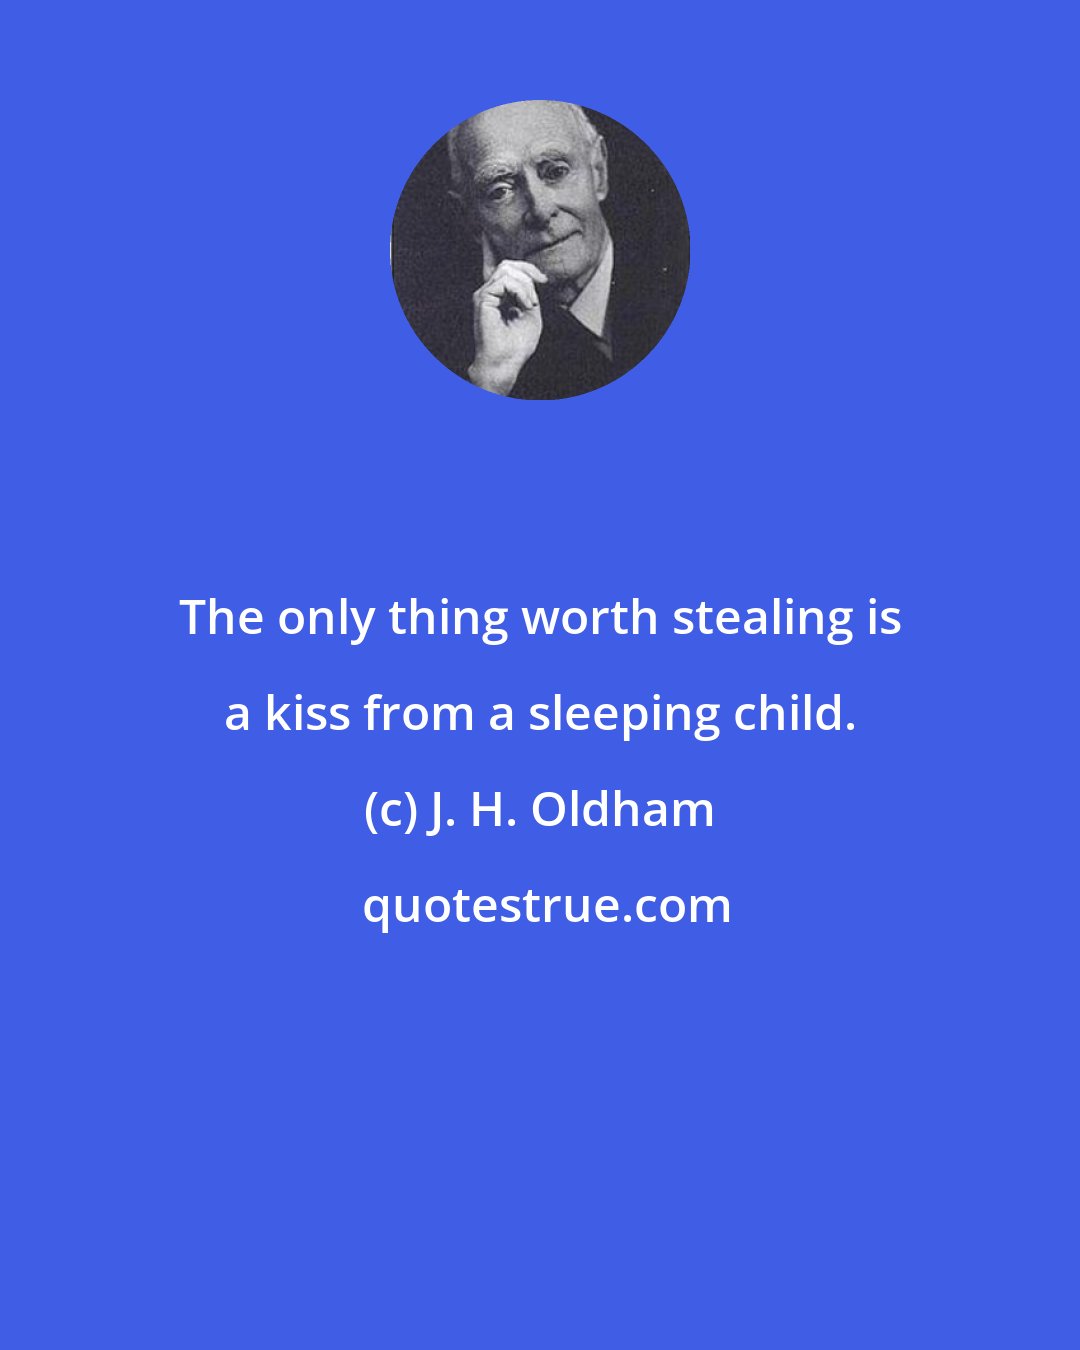 J. H. Oldham: The only thing worth stealing is a kiss from a sleeping child.